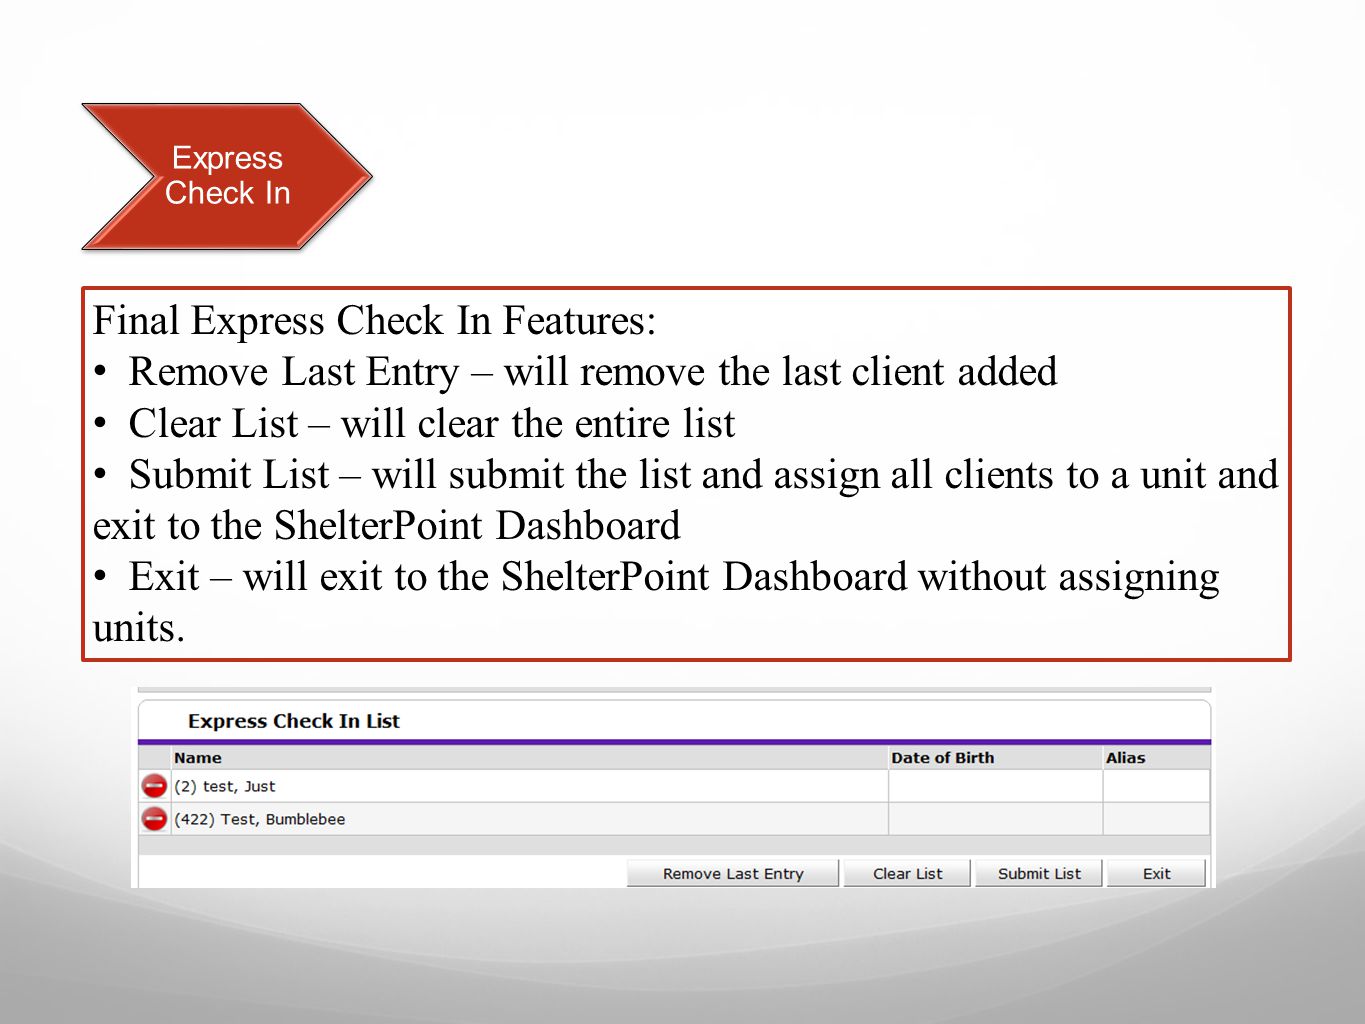 Express Check In Final Express Check In Features: Remove Last Entry – will remove the last client added Clear List – will clear the entire list Submit List – will submit the list and assign all clients to a unit and exit to the ShelterPoint Dashboard Exit – will exit to the ShelterPoint Dashboard without assigning units.